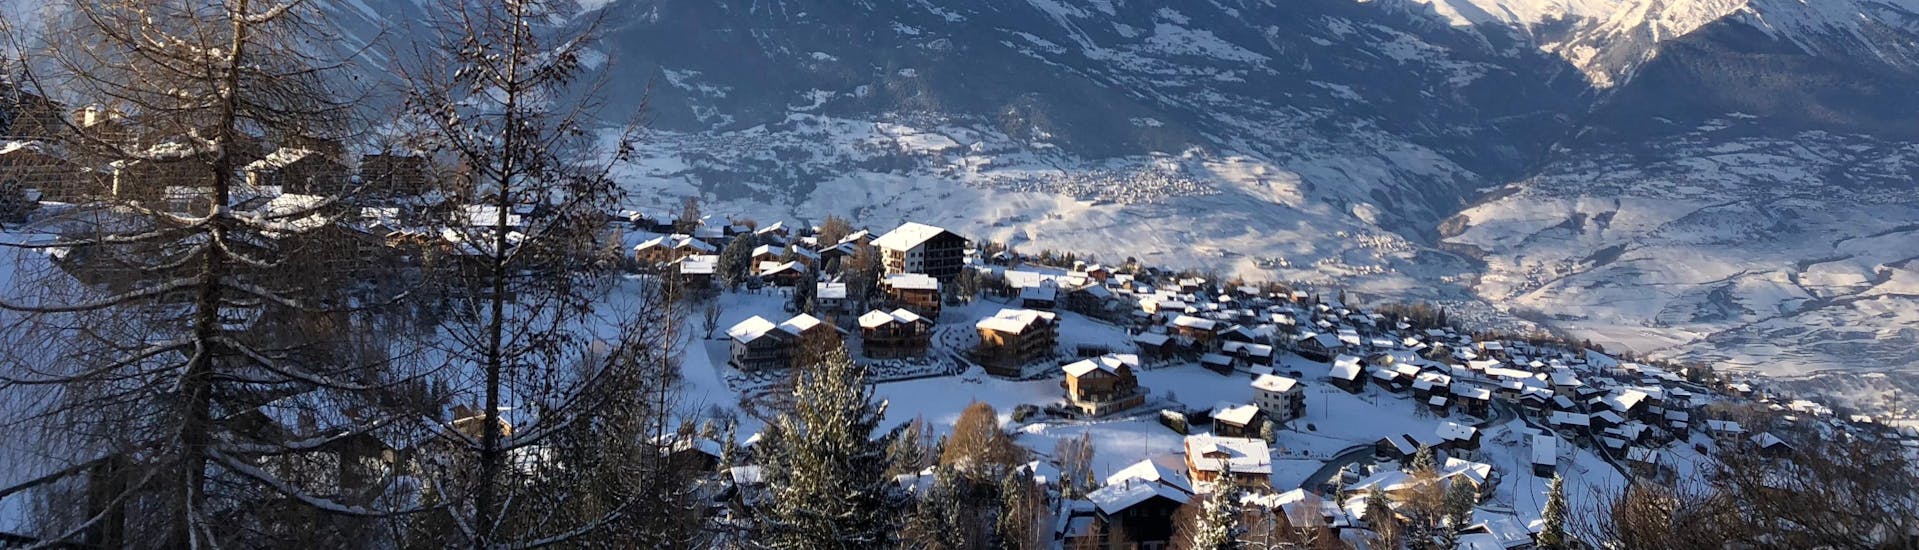 An aereal view of the ski resort of Nendaz-Siviez, a popular destination in the French-speaking part of Switzerland, where visitors can book ski lessons with one of the local ski schools.